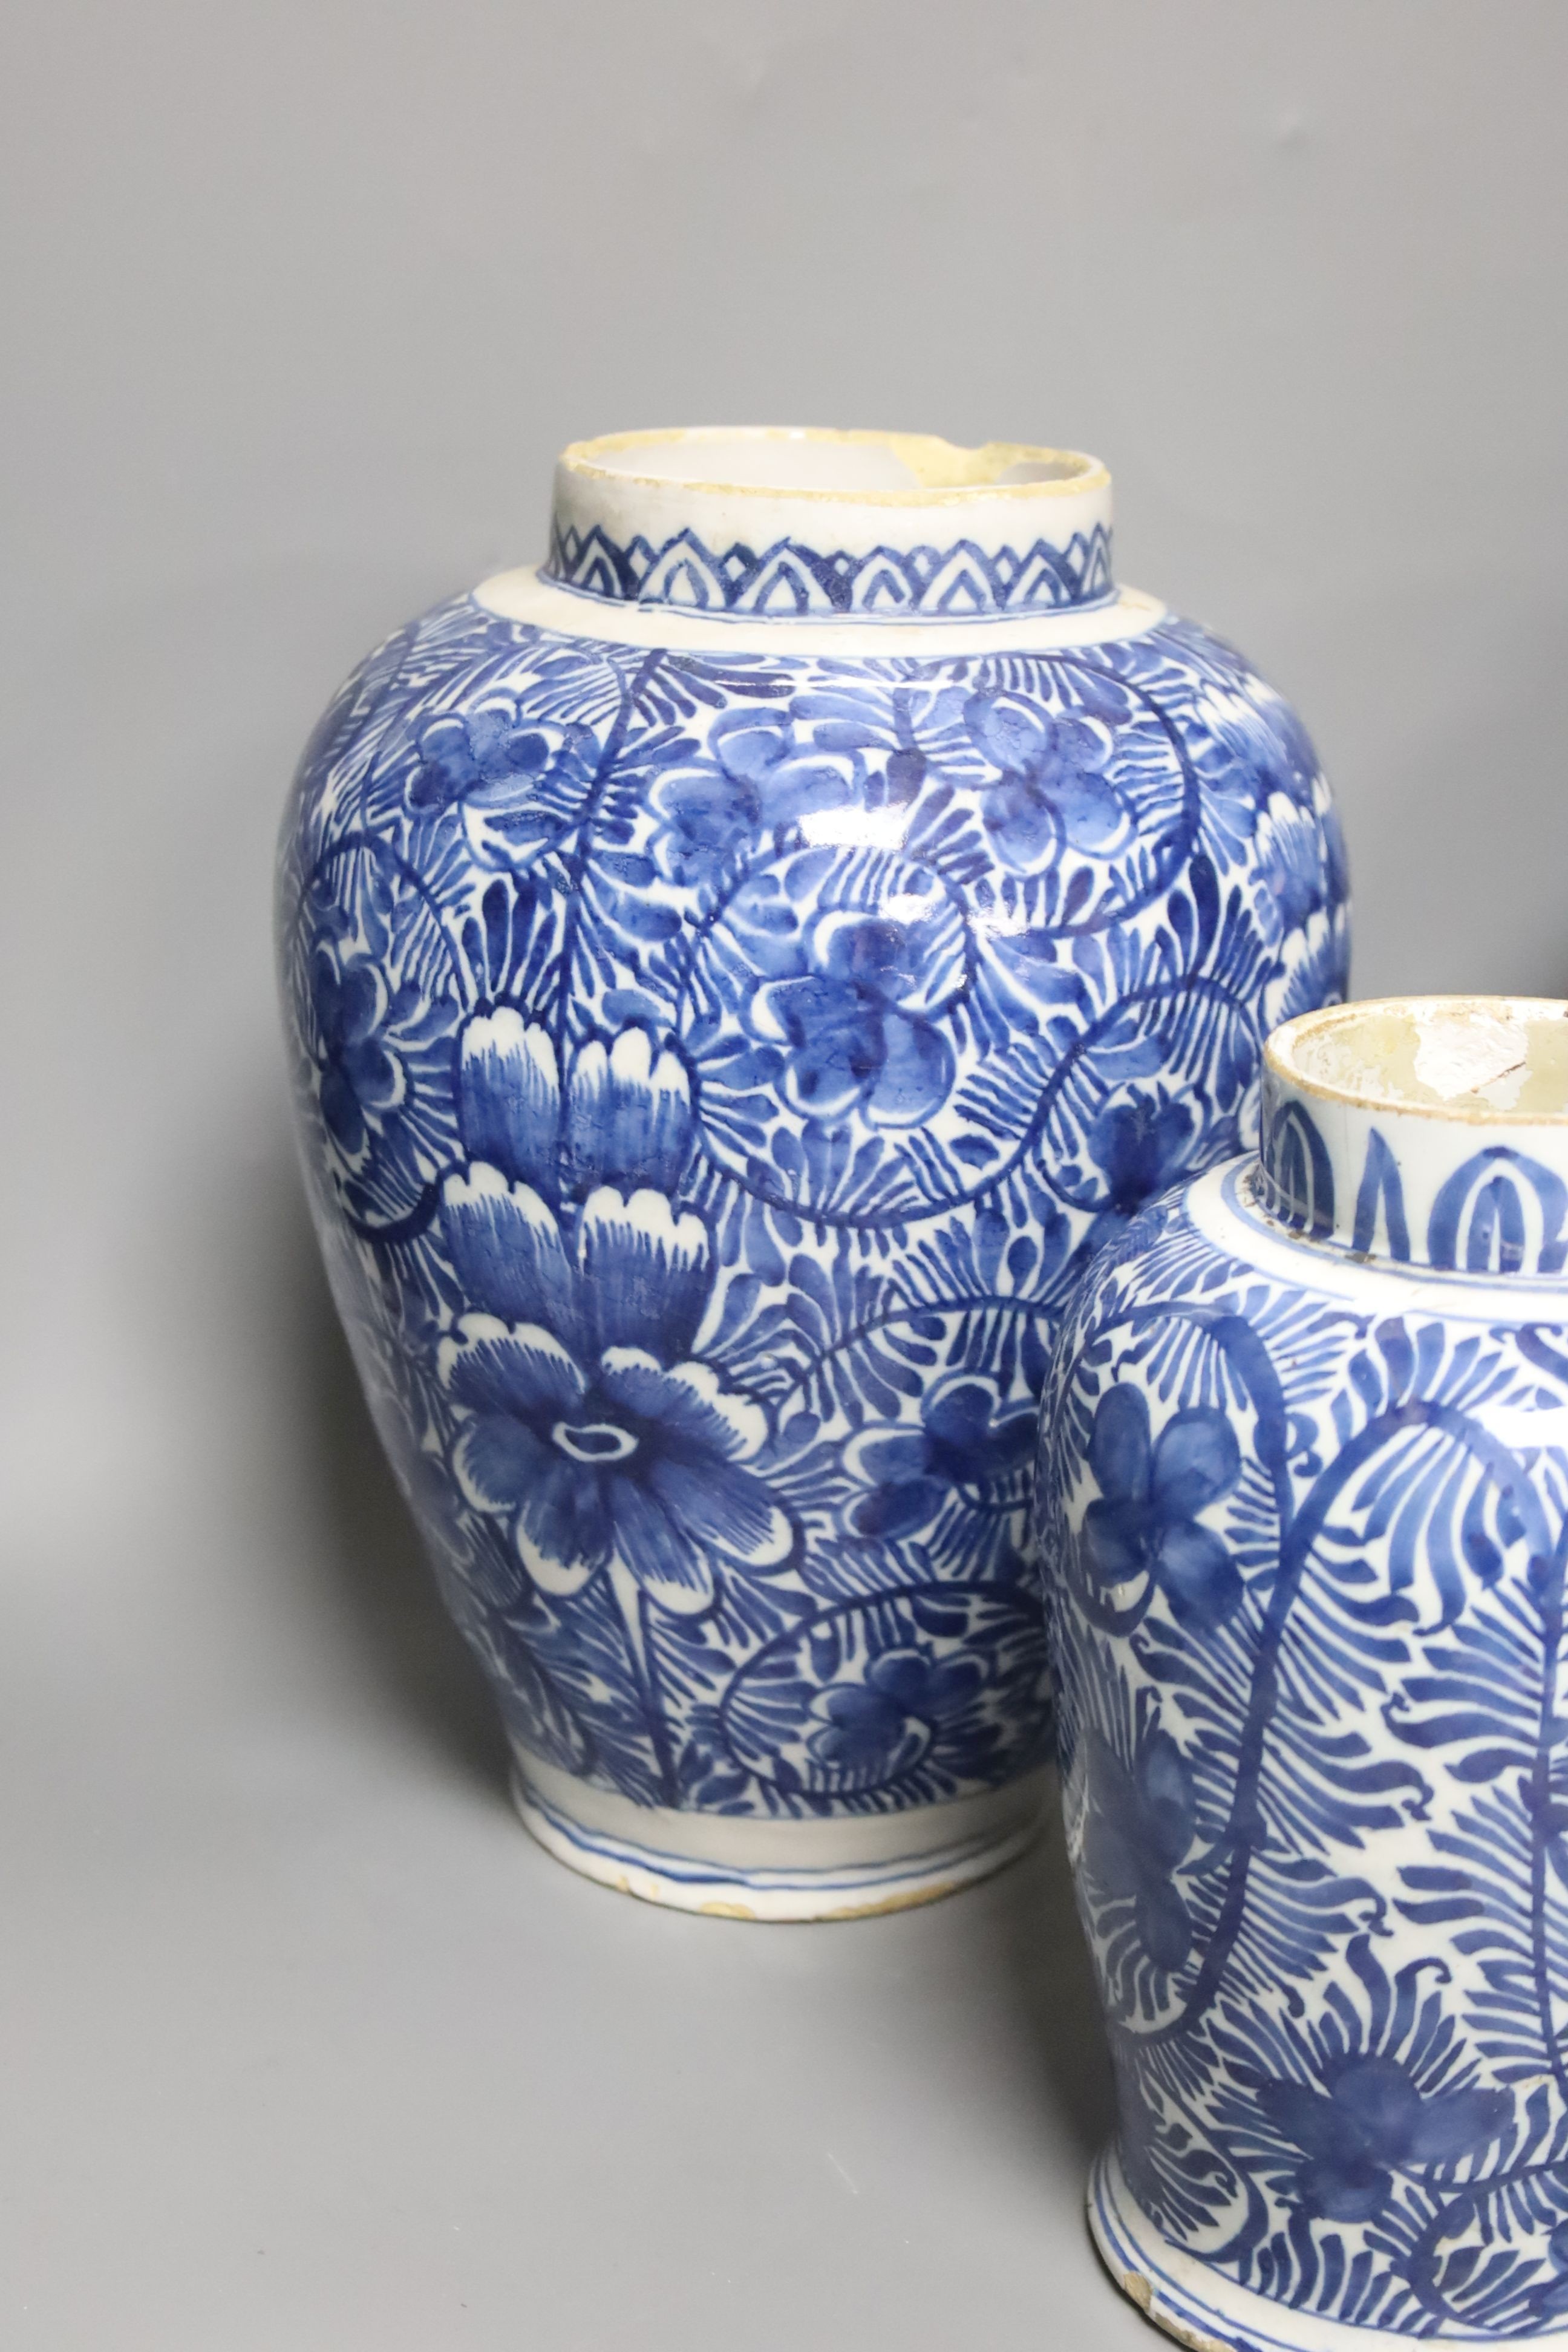 A pair of 18th century Dutch Delft blue and white oviform vases with floral decoration and two similar smaller vases, H 25cm & 19cm